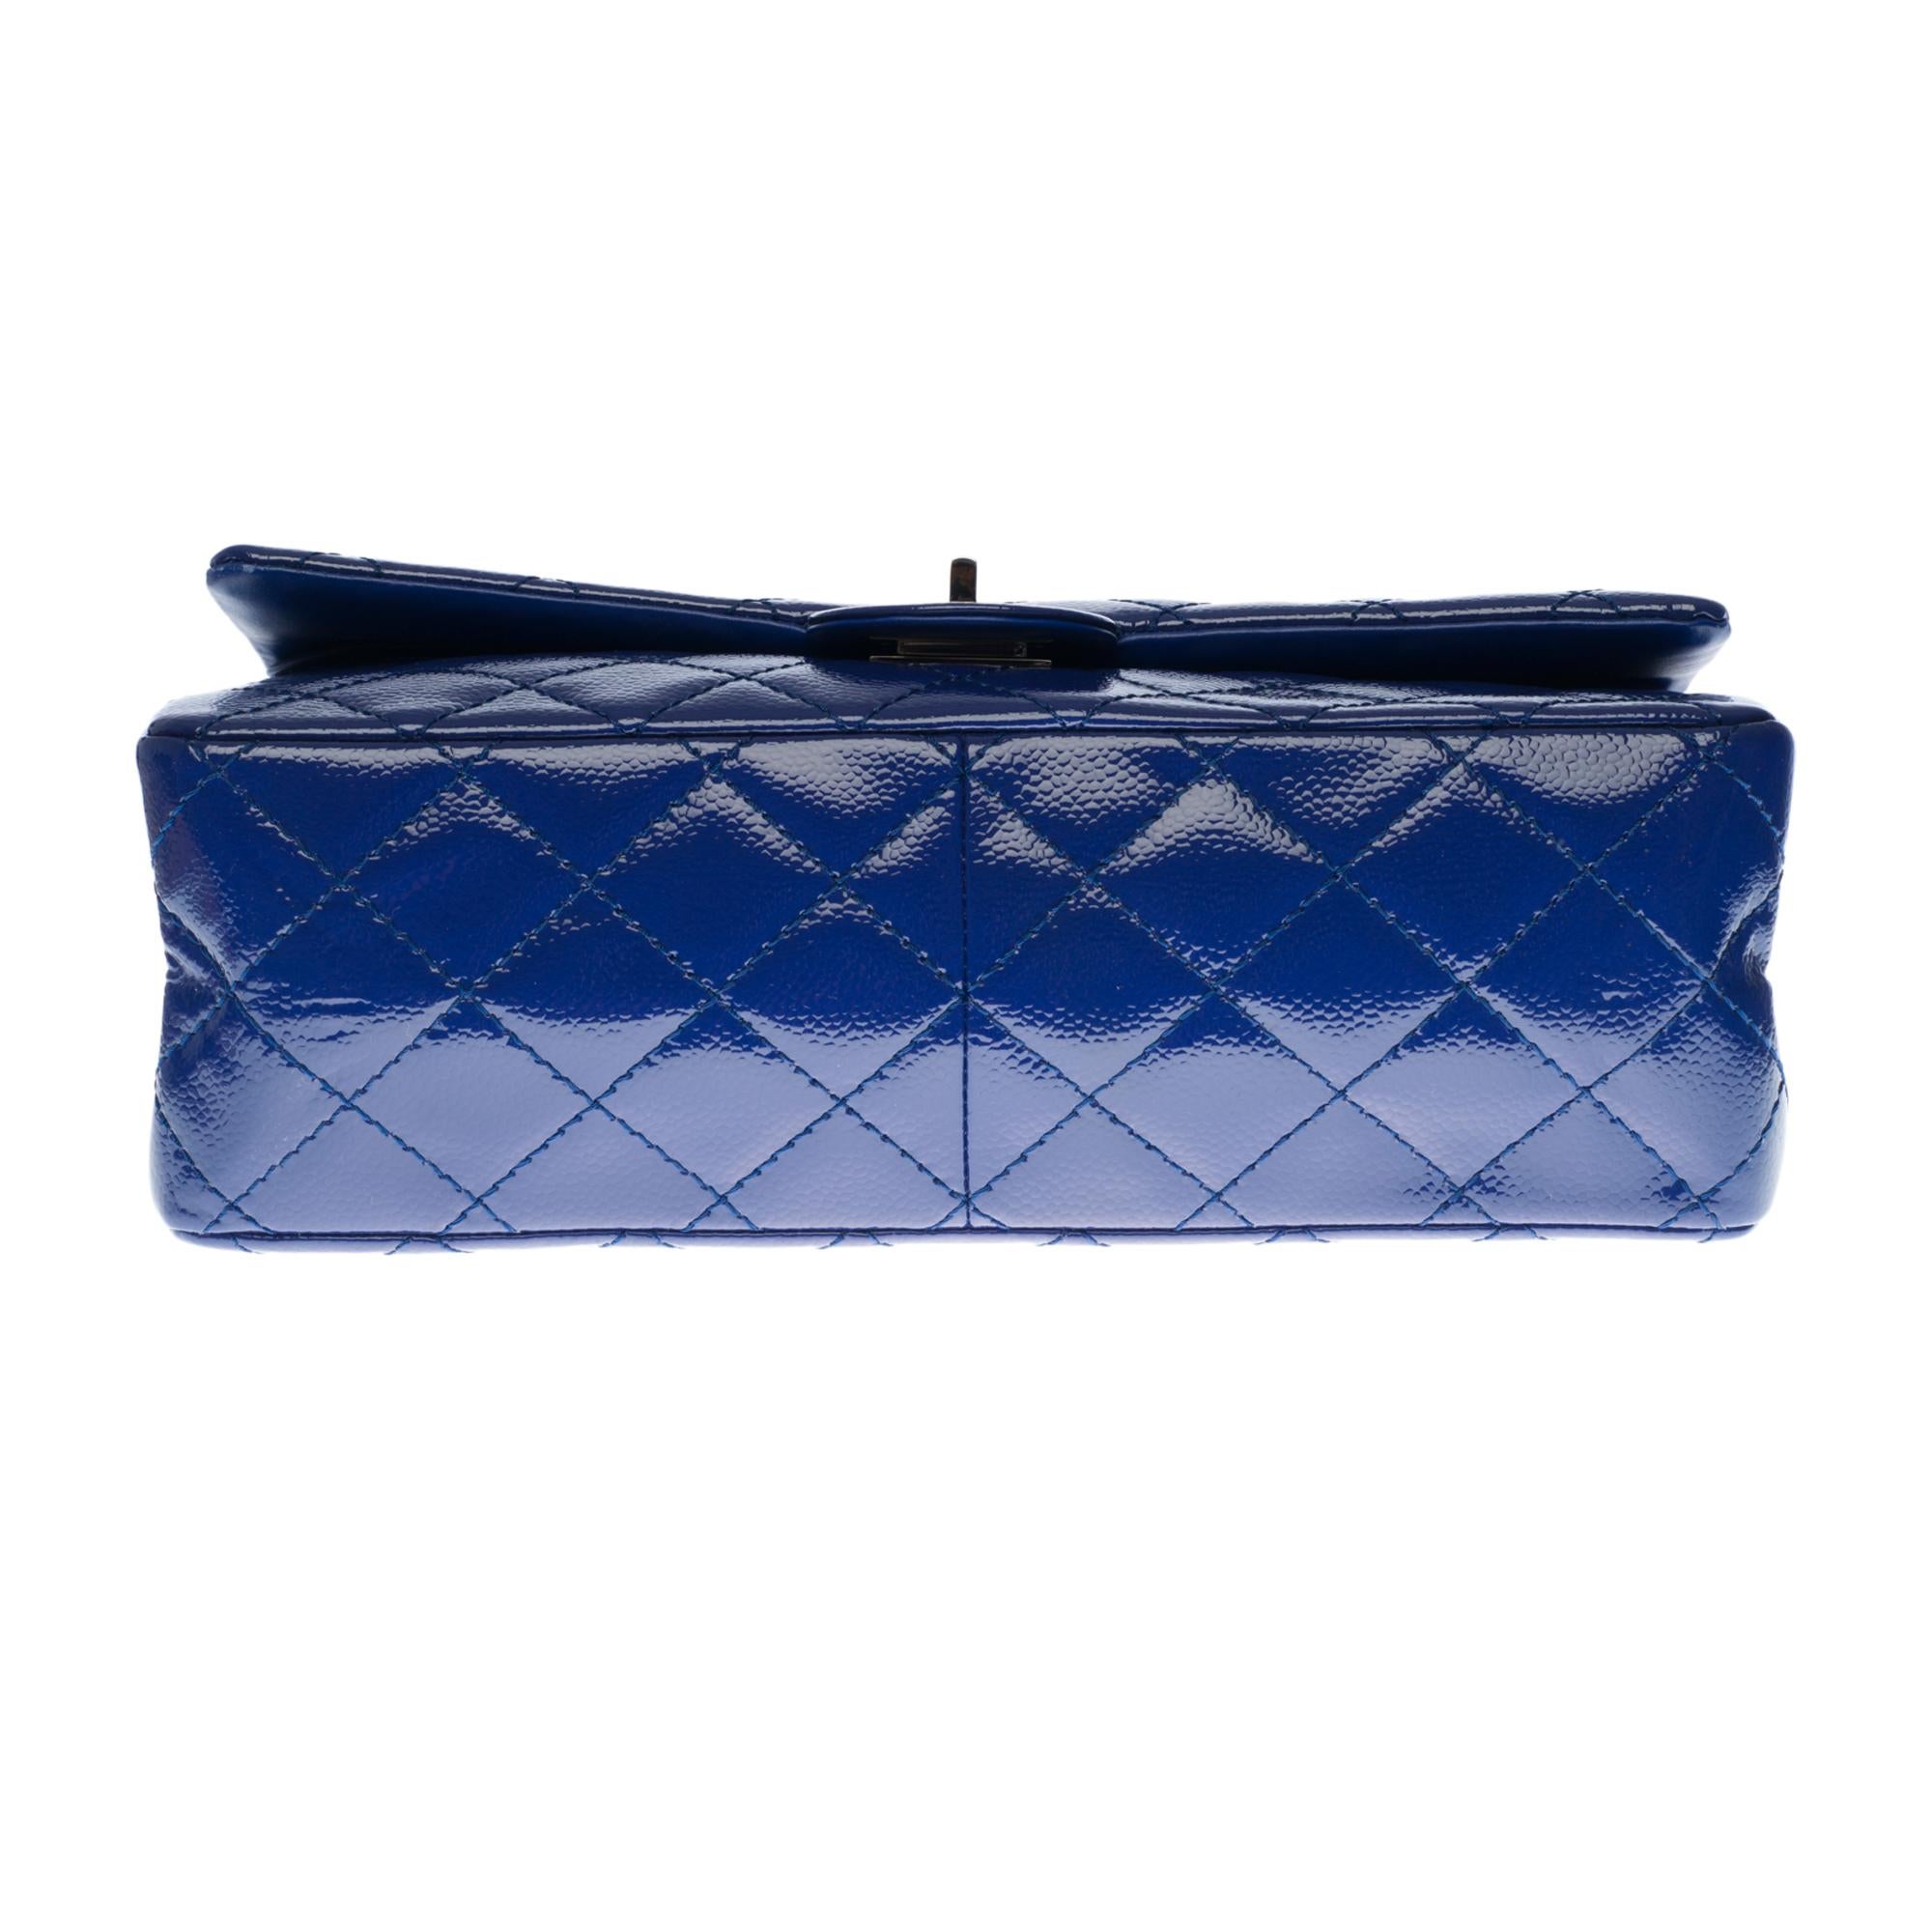 Chanel Classic 2.55 shoulder bag in electric blue quilted patent leather, SHW 1